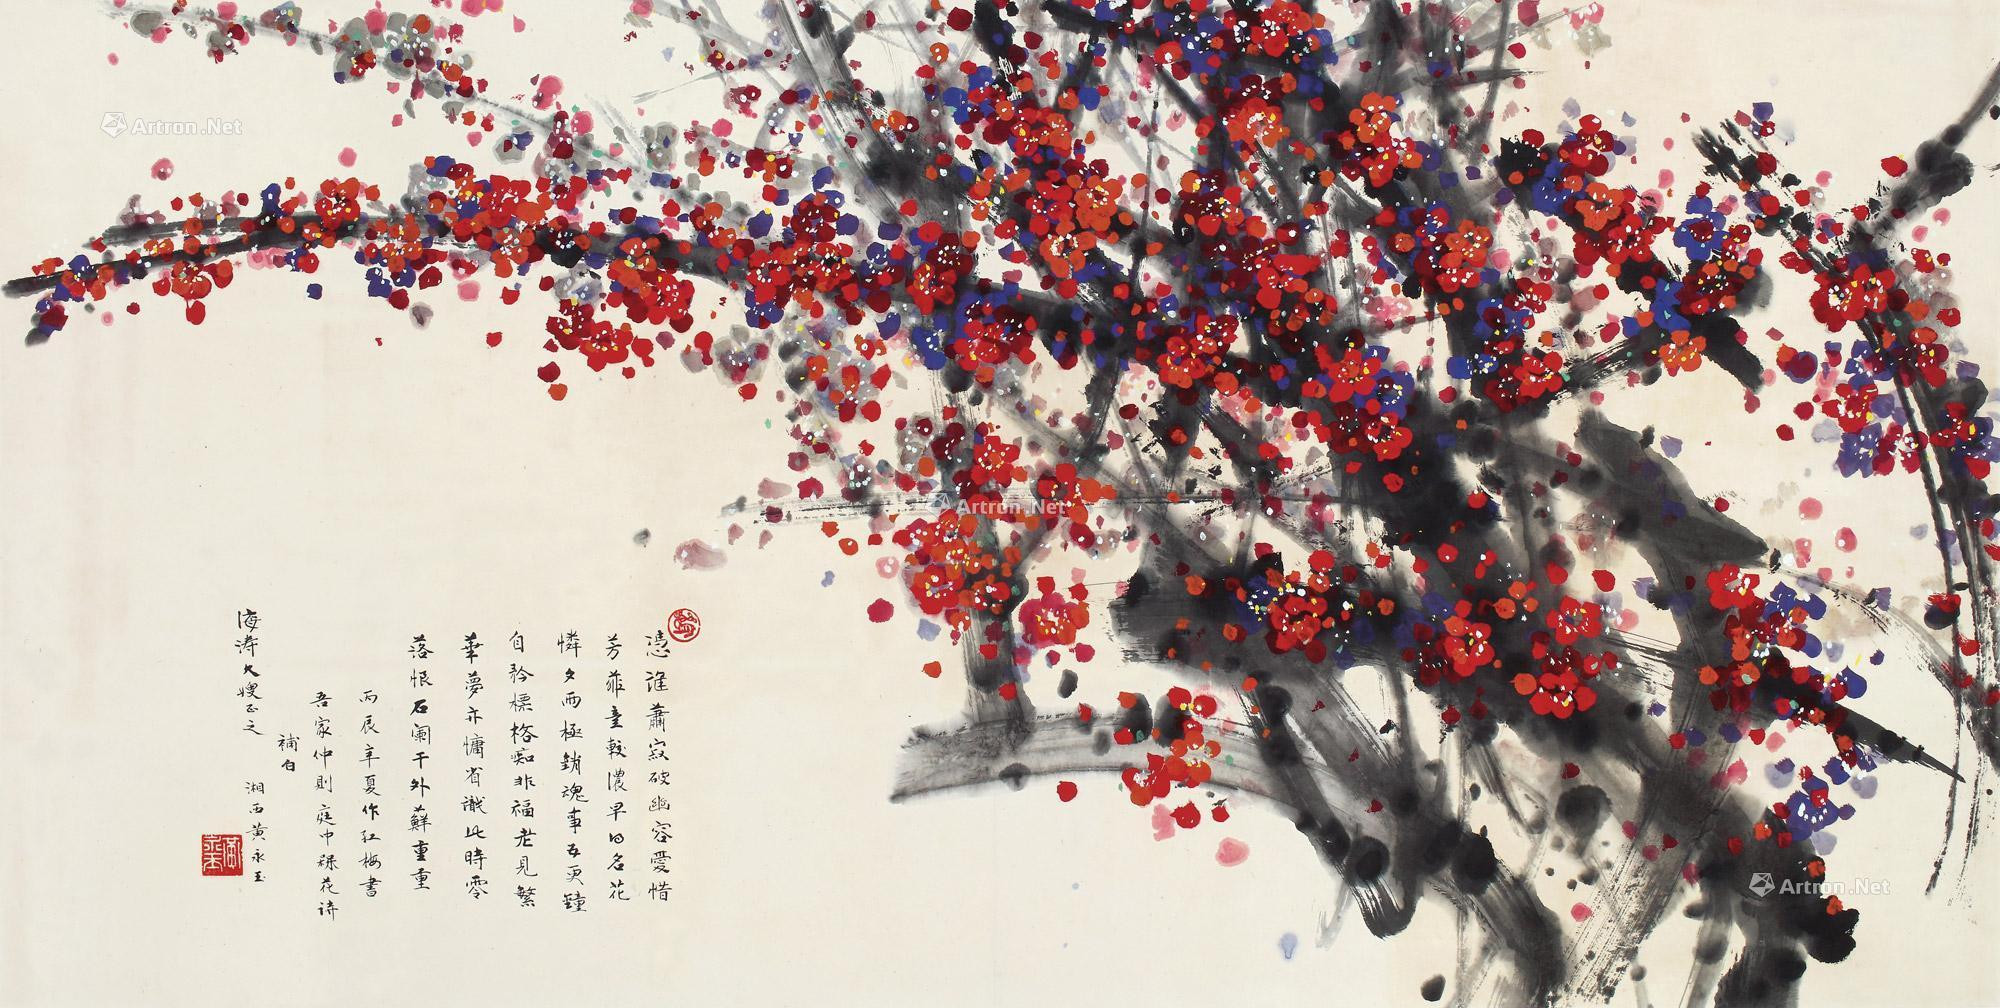 Red Plum Blossoms